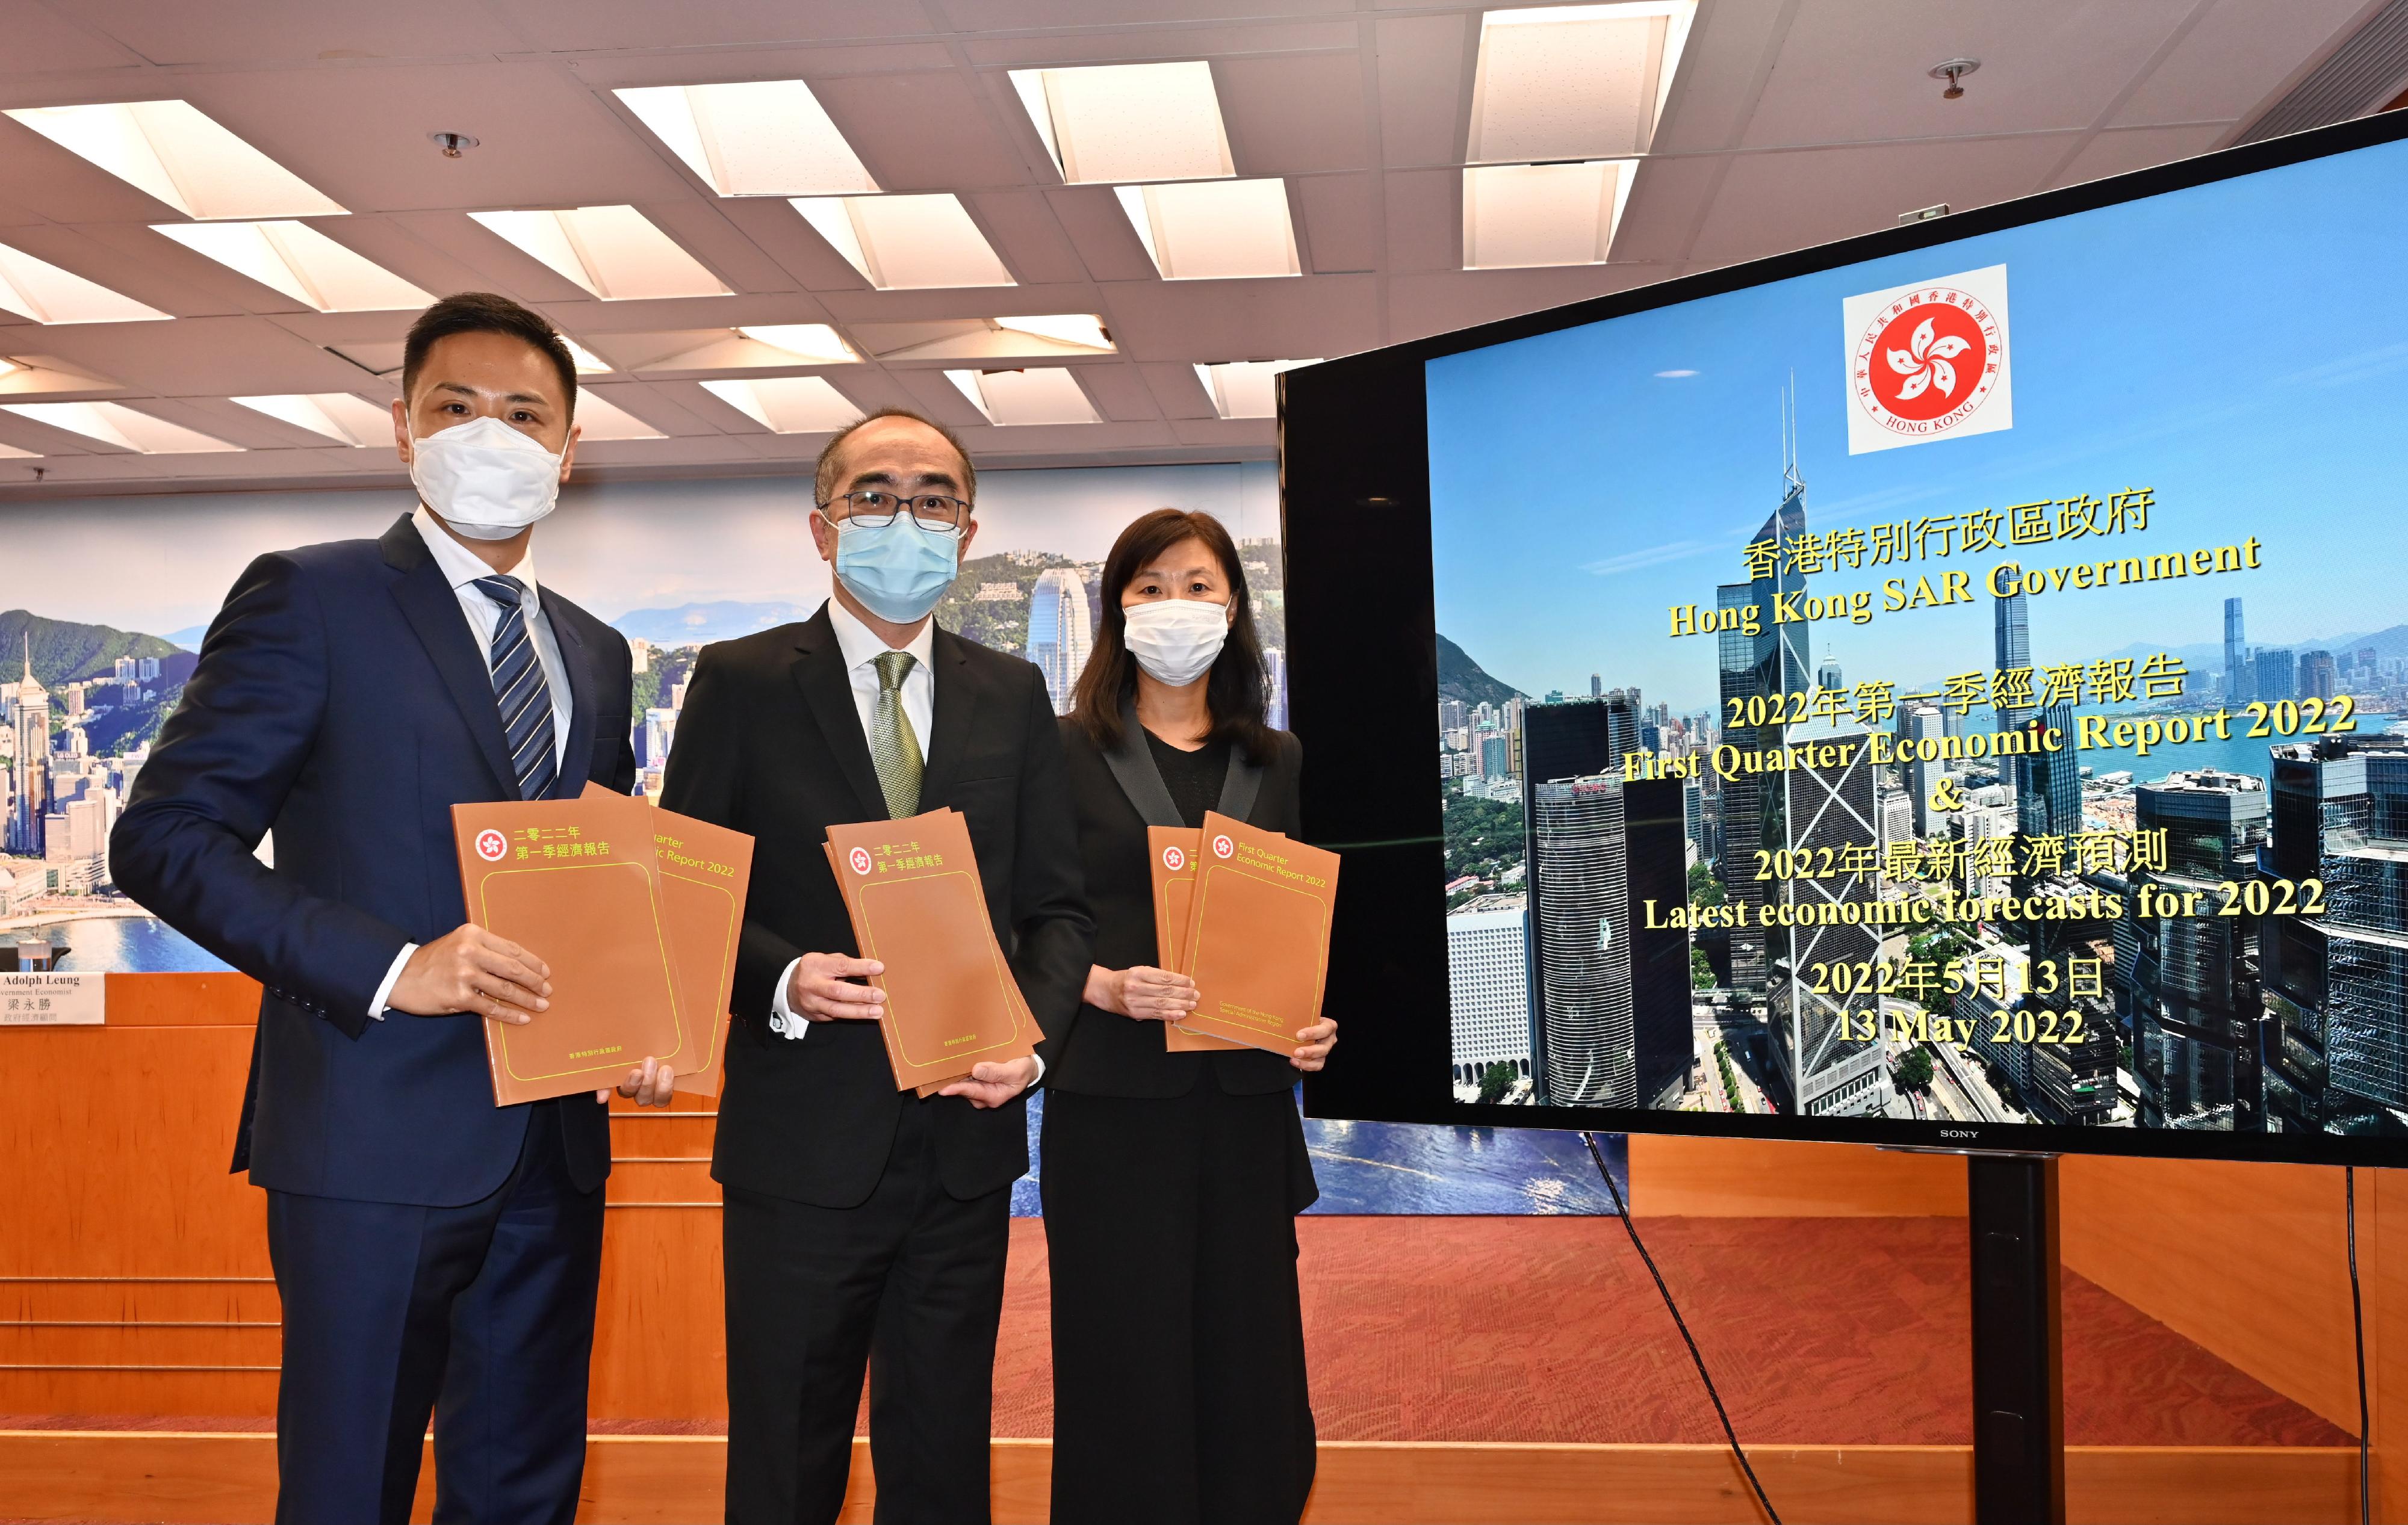 The Government Economist, Mr Adolph Leung (centre), presents the First Quarter Economic Report 2022 at a press conference today (May 13). Also present are the Deputy Government Economist, Mr Desmond Hou (left), and Assistant Commissioner for Census and Statistics Ms Wendy Hung (right).